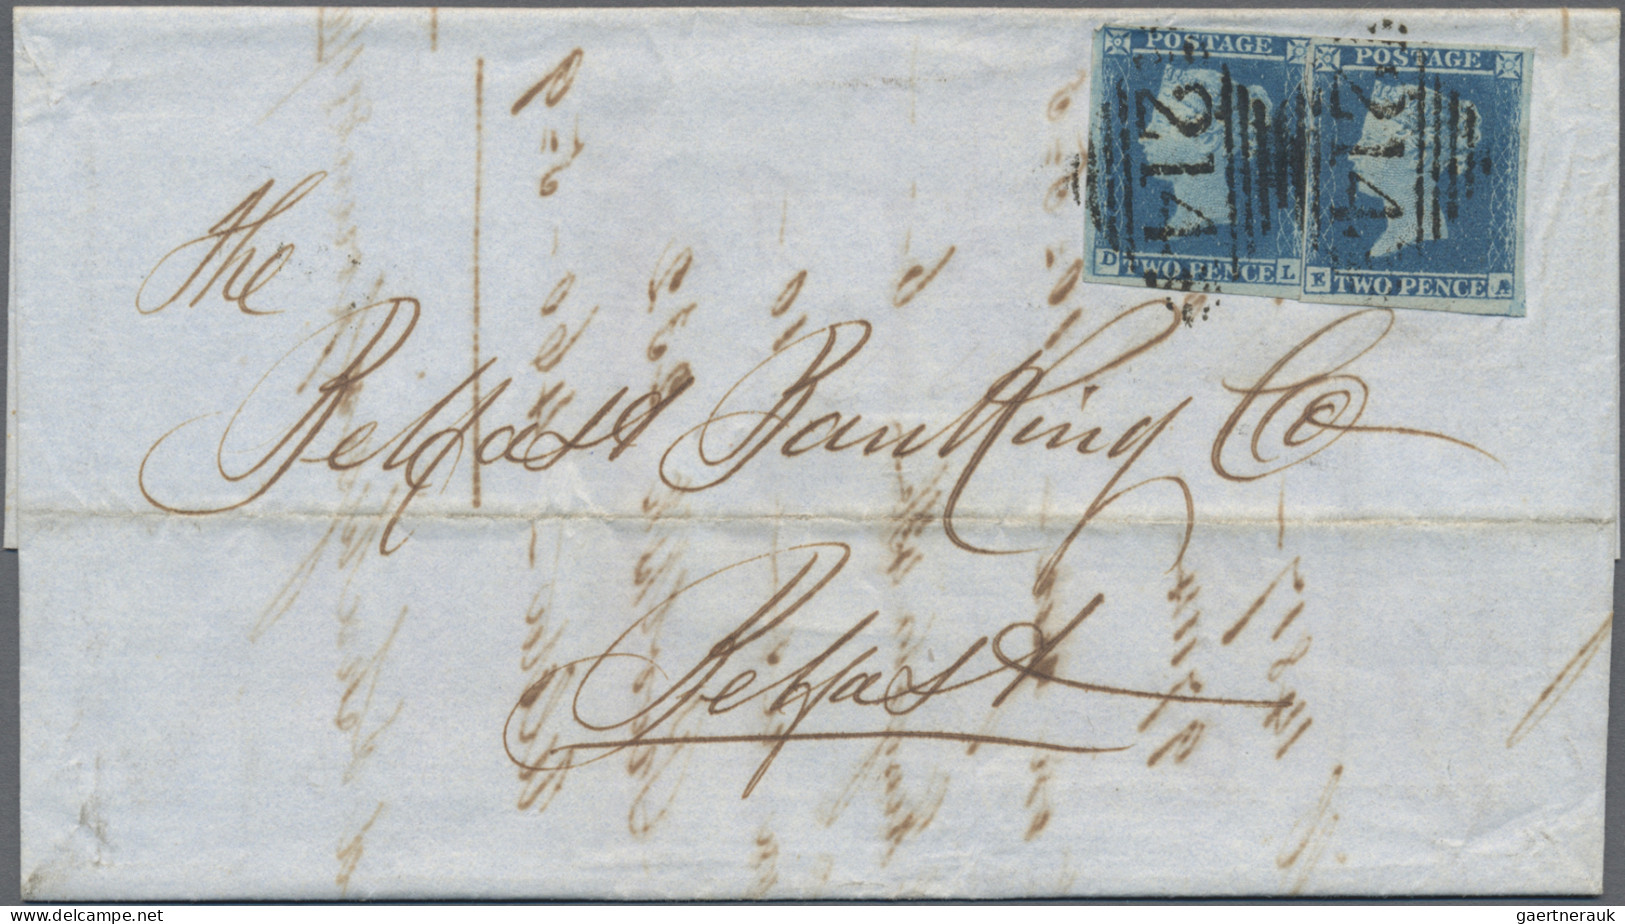 Ireland: 1740/1922 (ca.), balance of apprx. 70 entires, thereof approx. 50 stamp